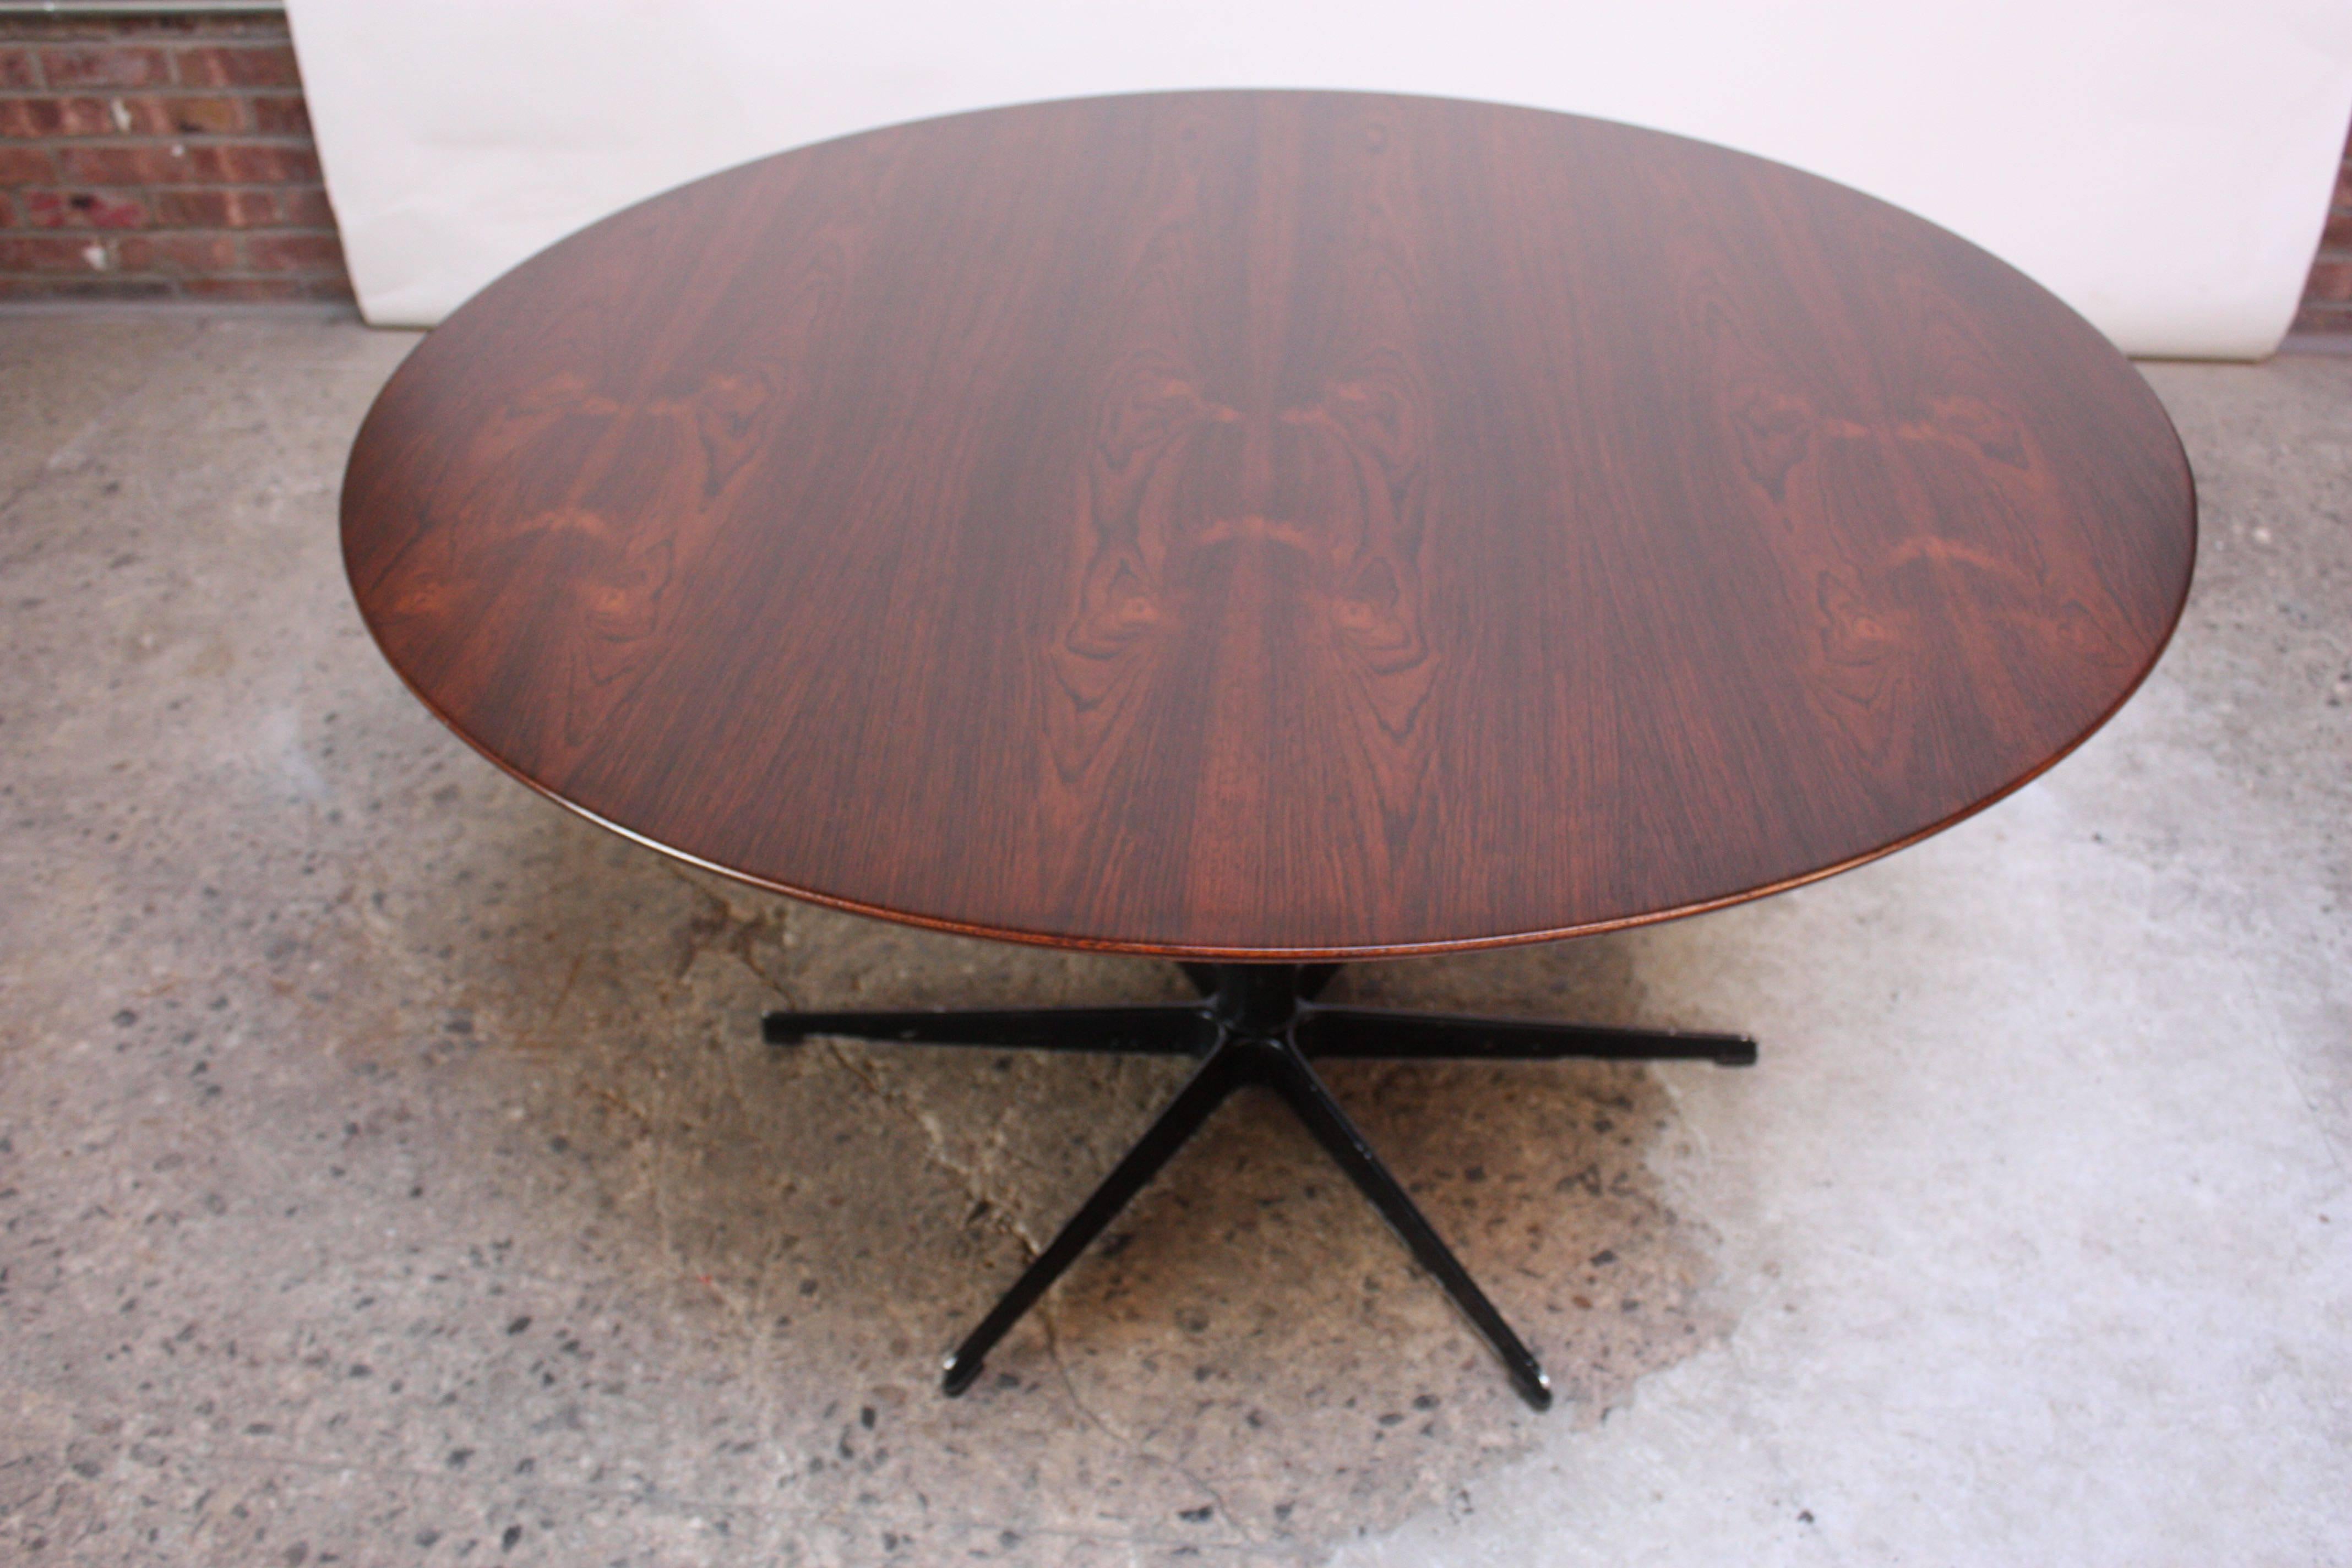 This rosewood table was designed in 1968 by Arne Jacobsen for Fritz Hansen as part of the 'six-star series.' As its name suggests, the lacquered aluminum base fans out into six points and the round top is rosewood (all materials and sizes were